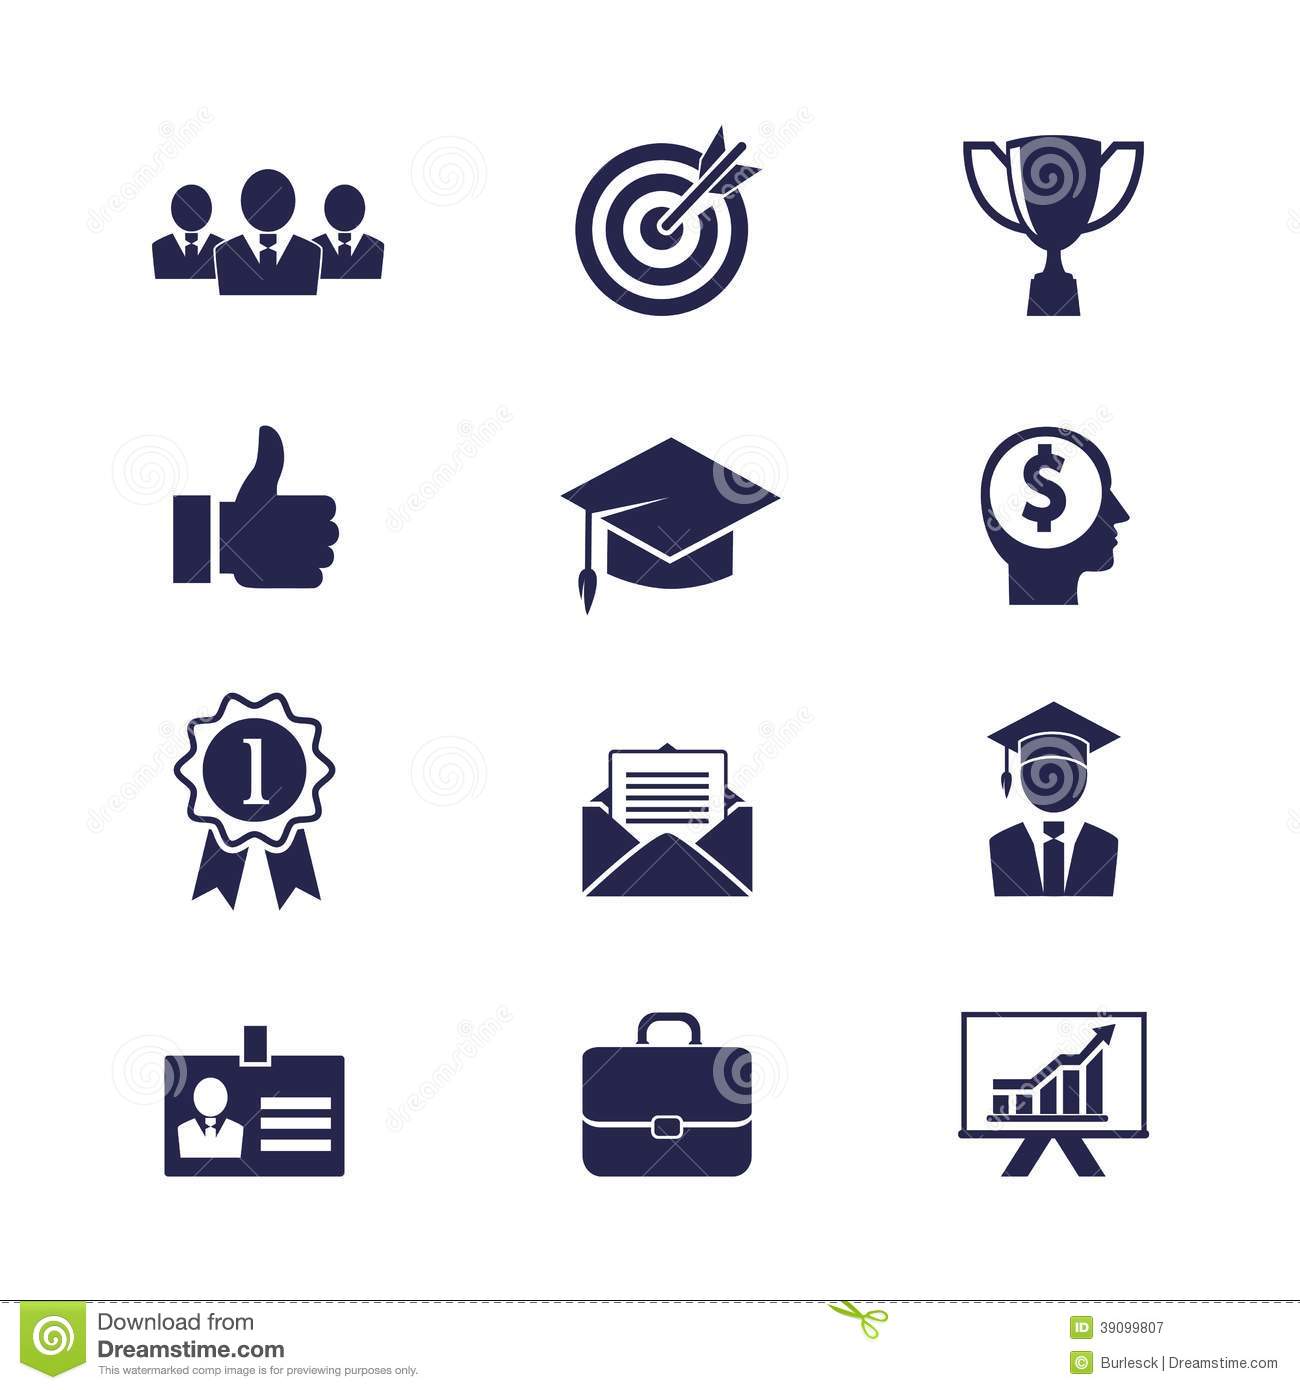 18 Free Career Icons Images